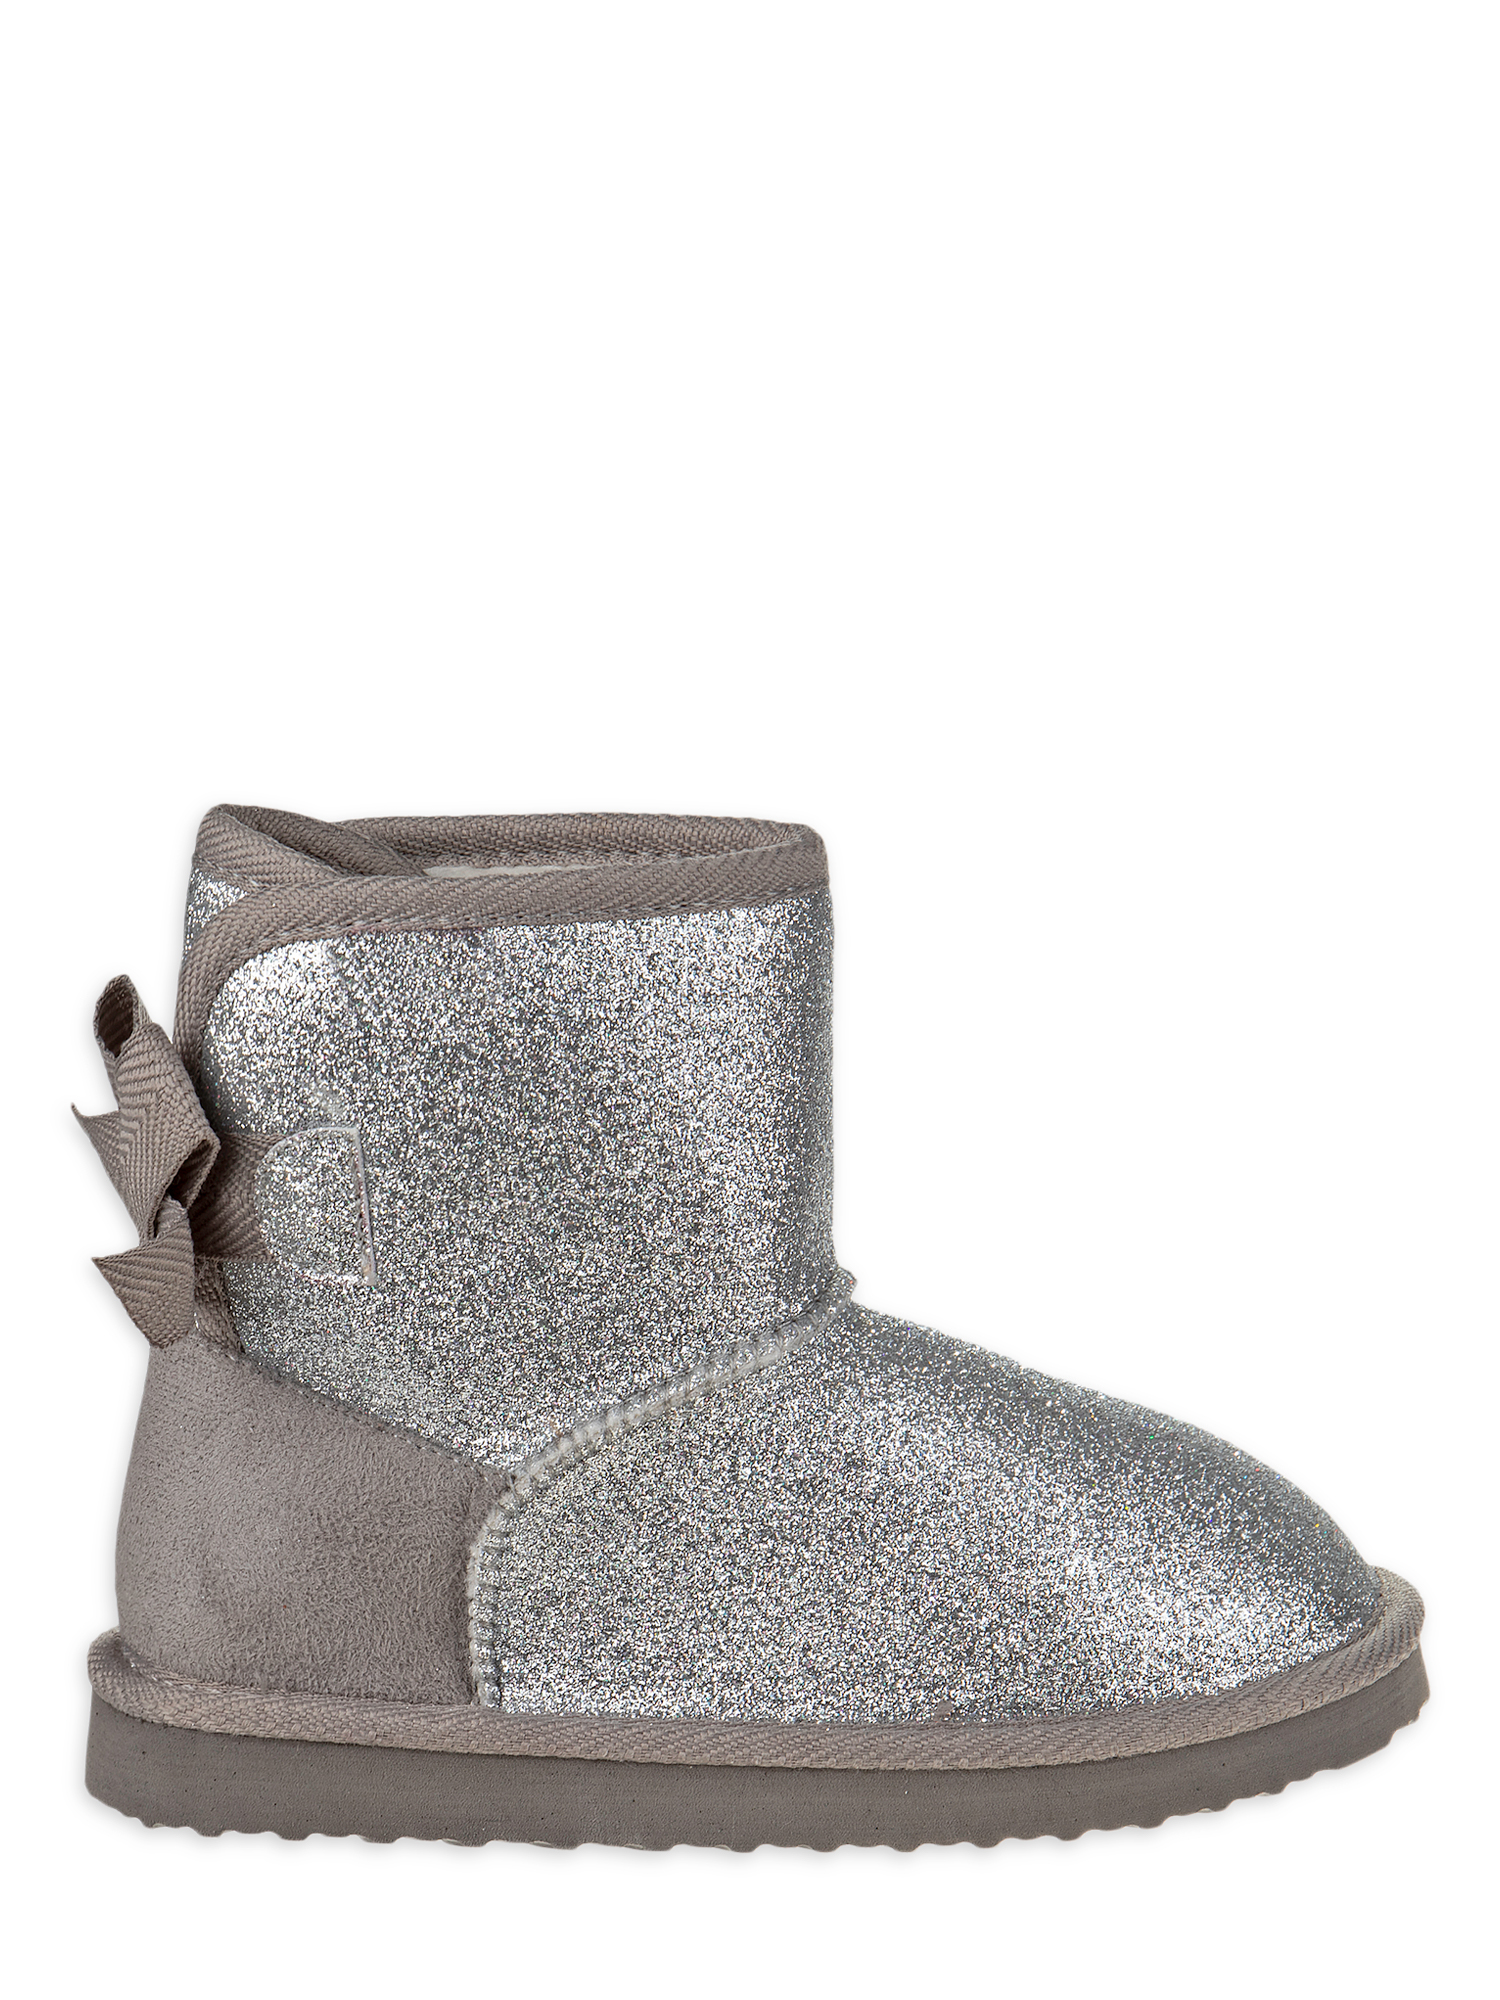 Josmo Glitter & Bows Faux Shearling Ankle Boot (Toddler Girls) - image 2 of 5